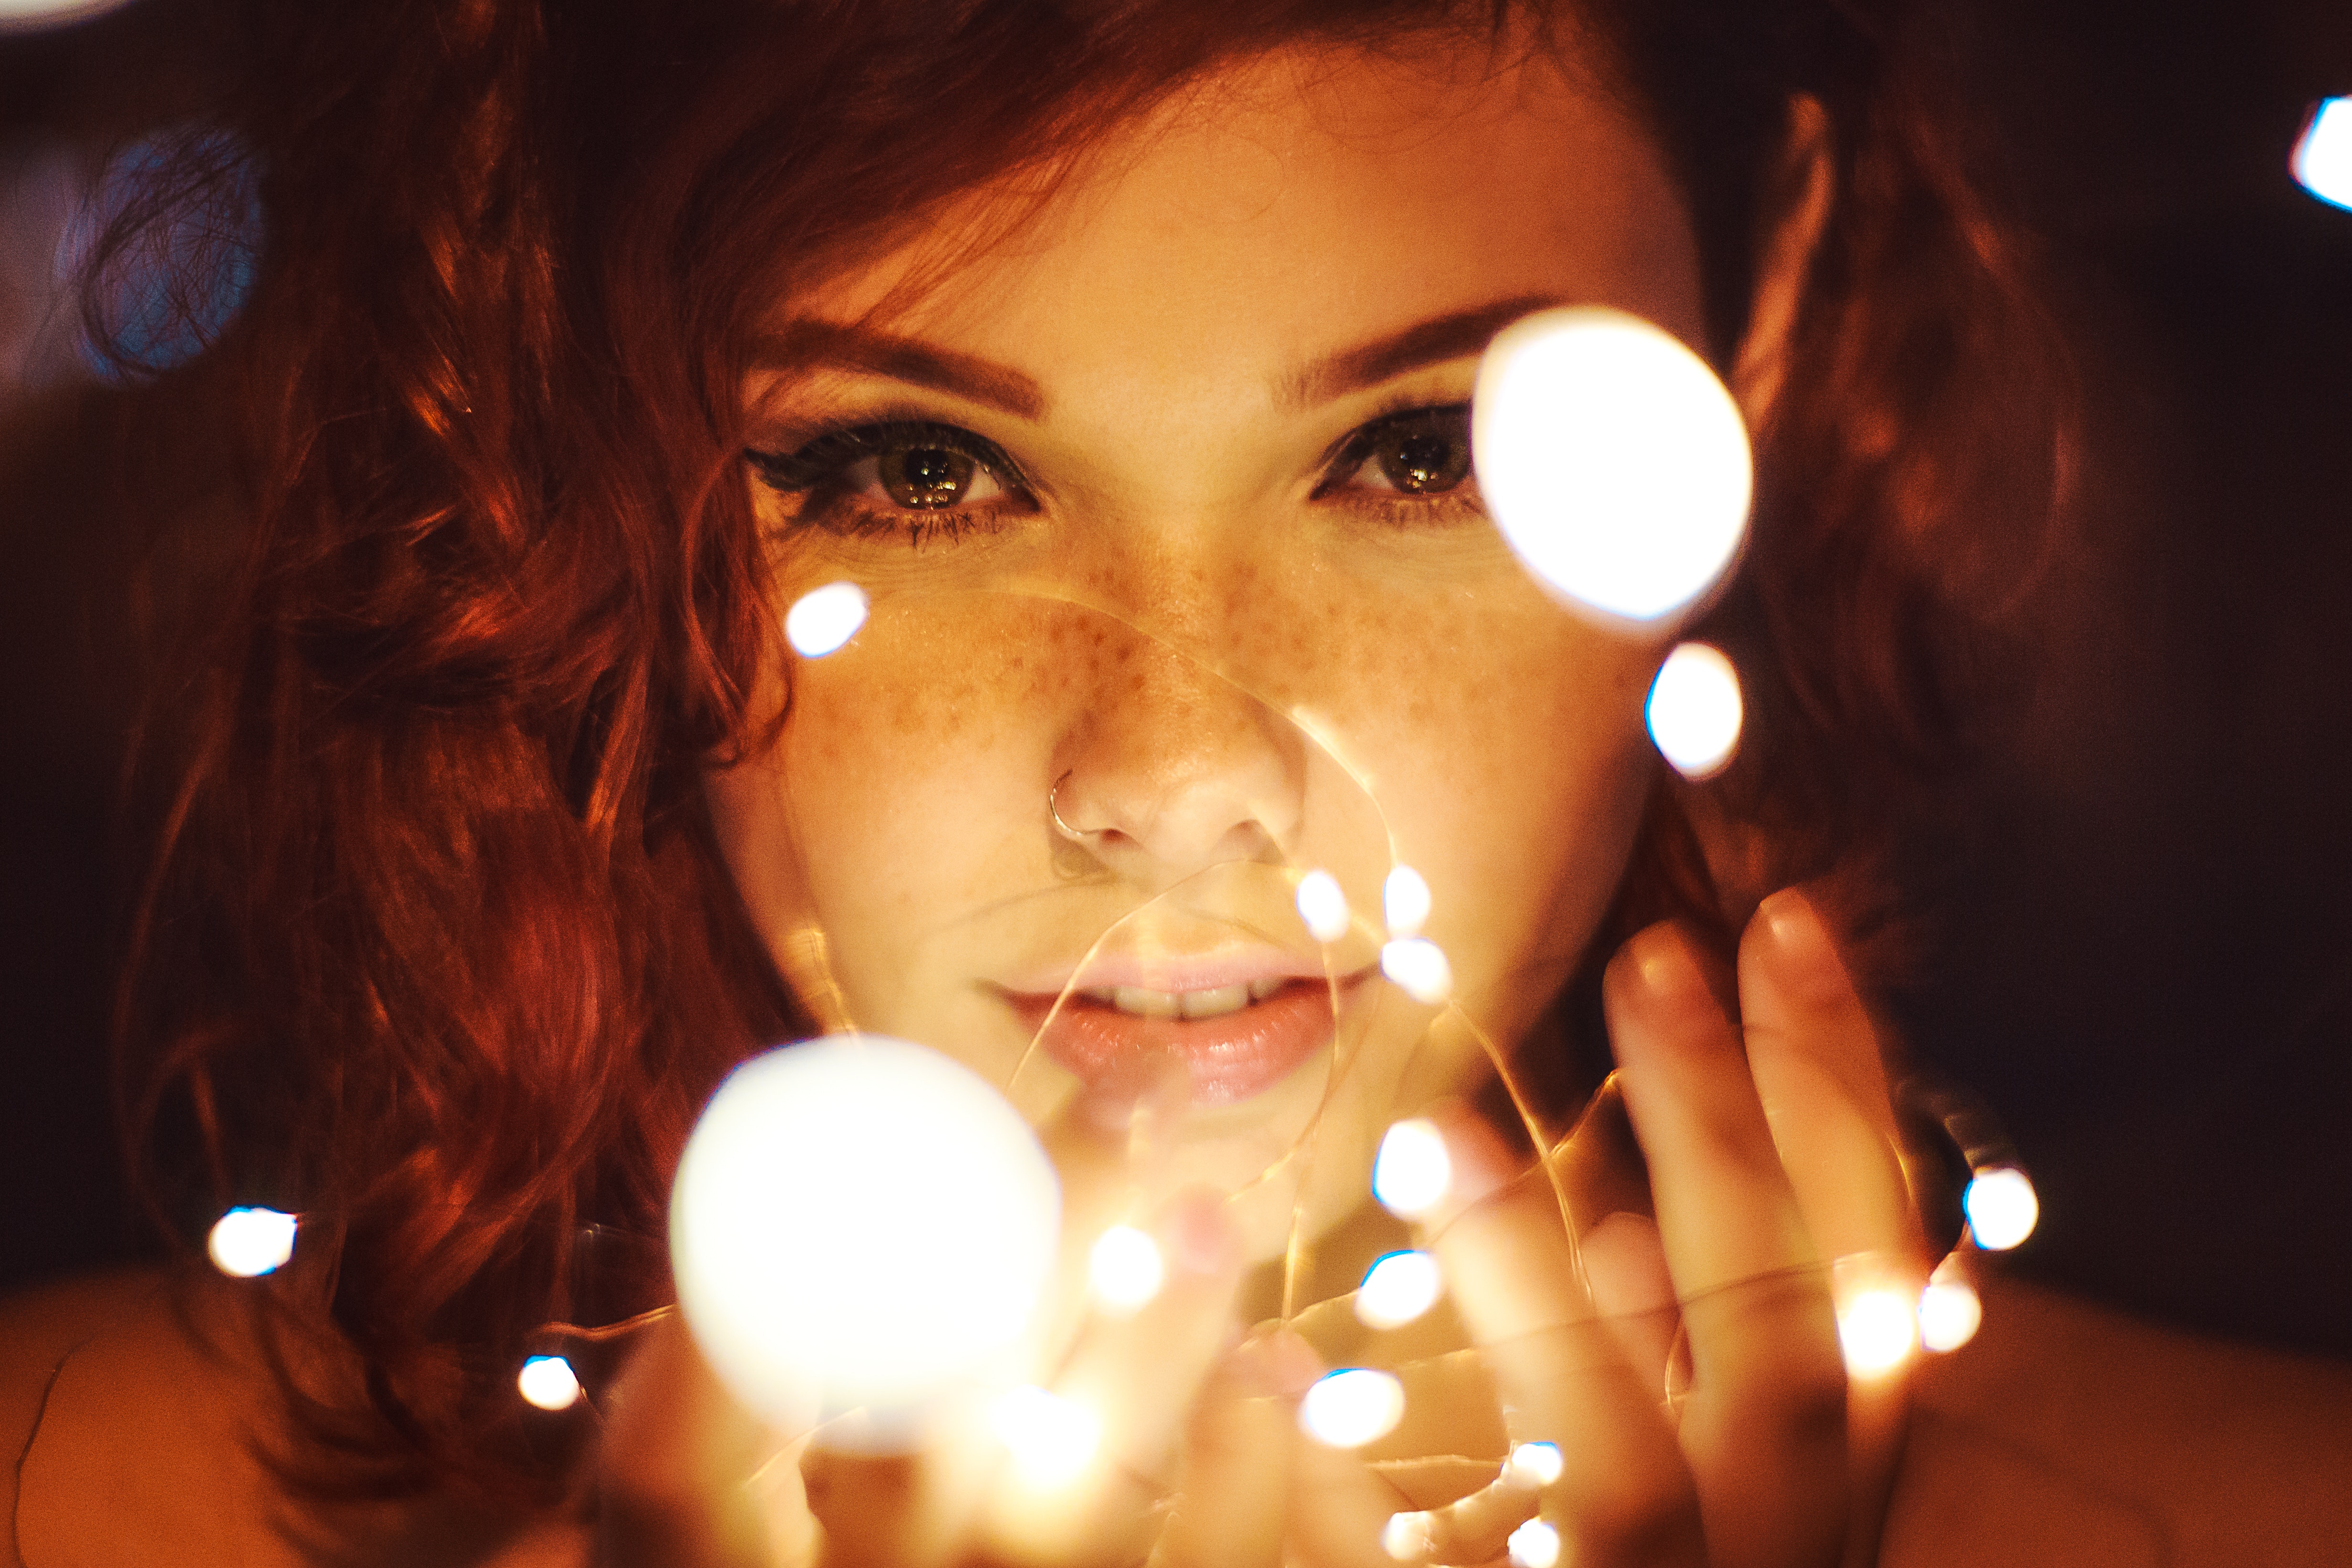 Photography of a Woman Holding Lights, Happy, Young, Woman, Smiling, HQ Photo